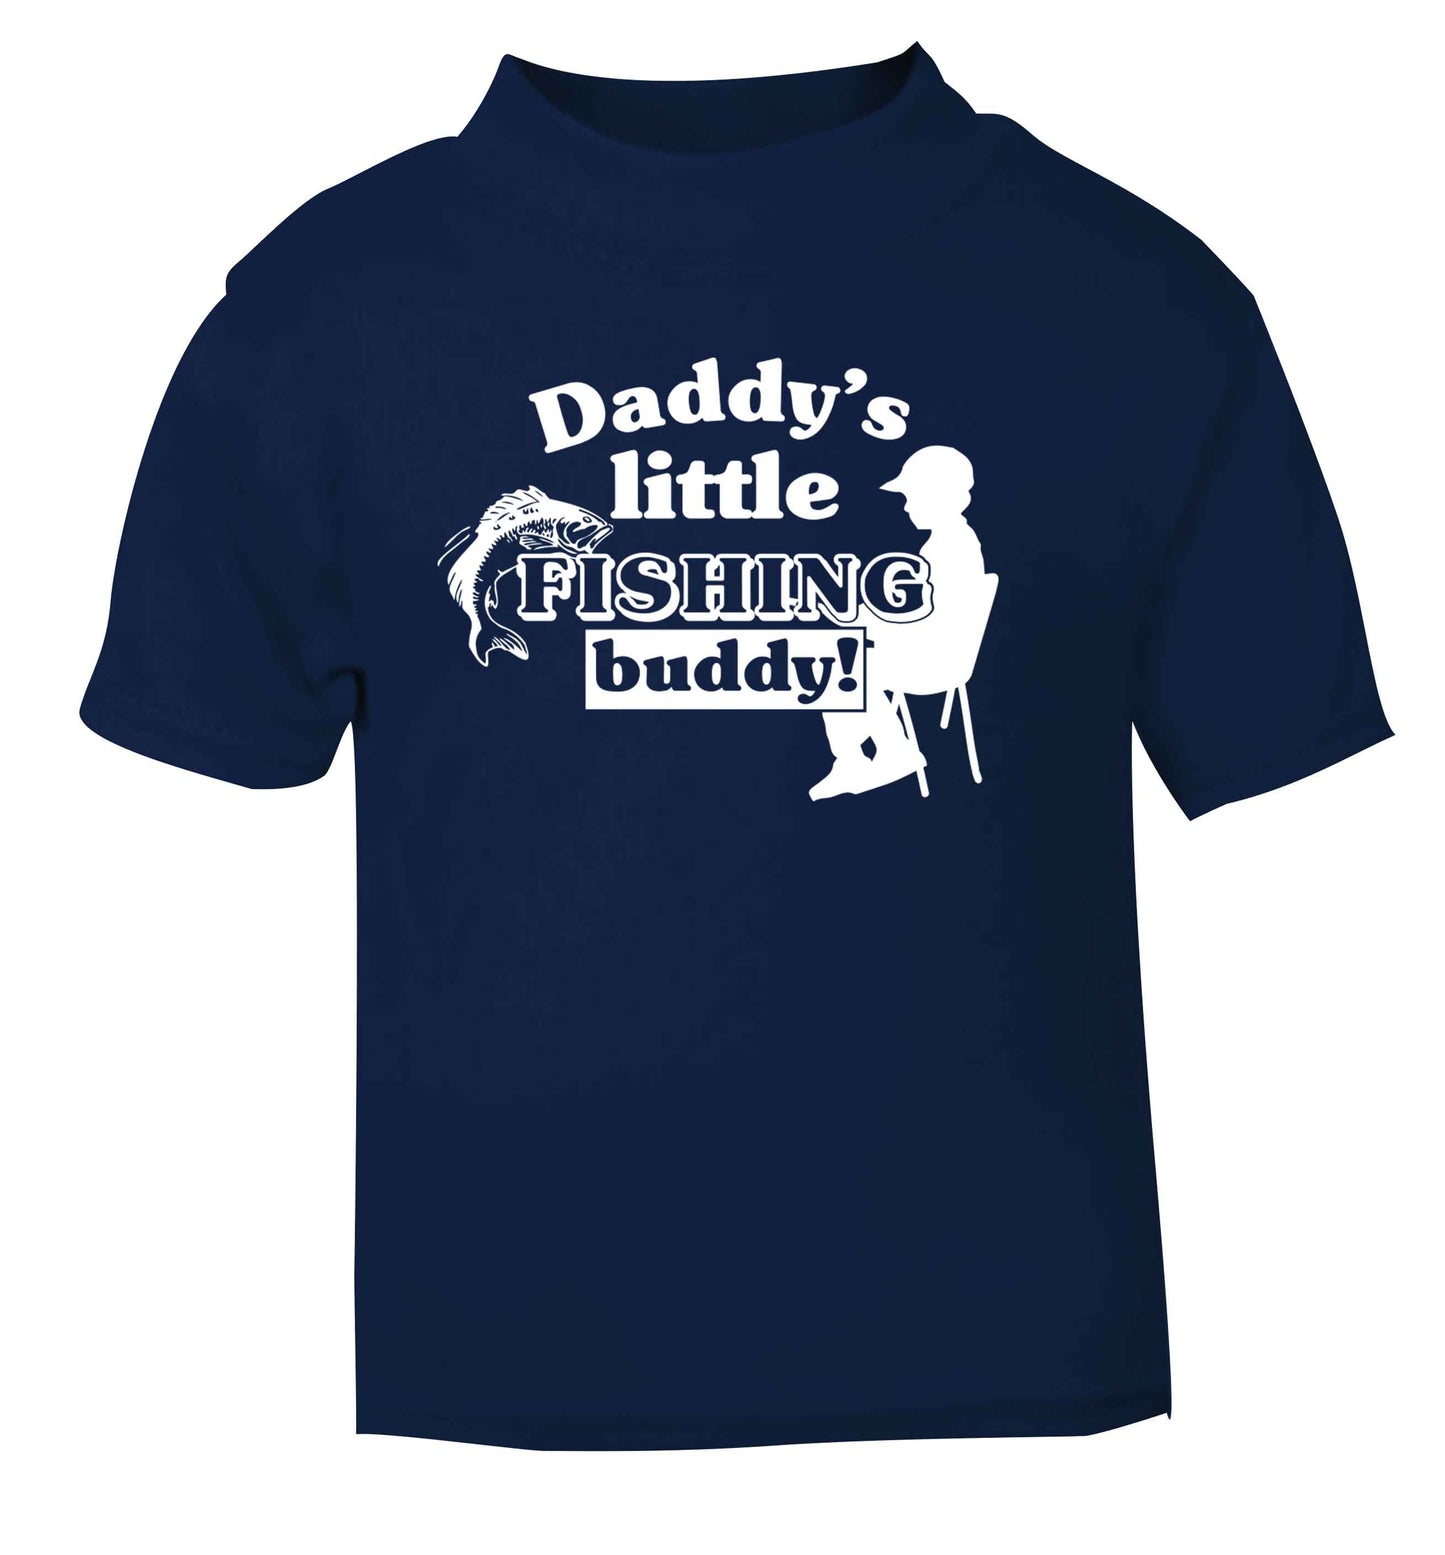 Daddy's little fishing buddy navy Baby Toddler Tshirt 2 Years